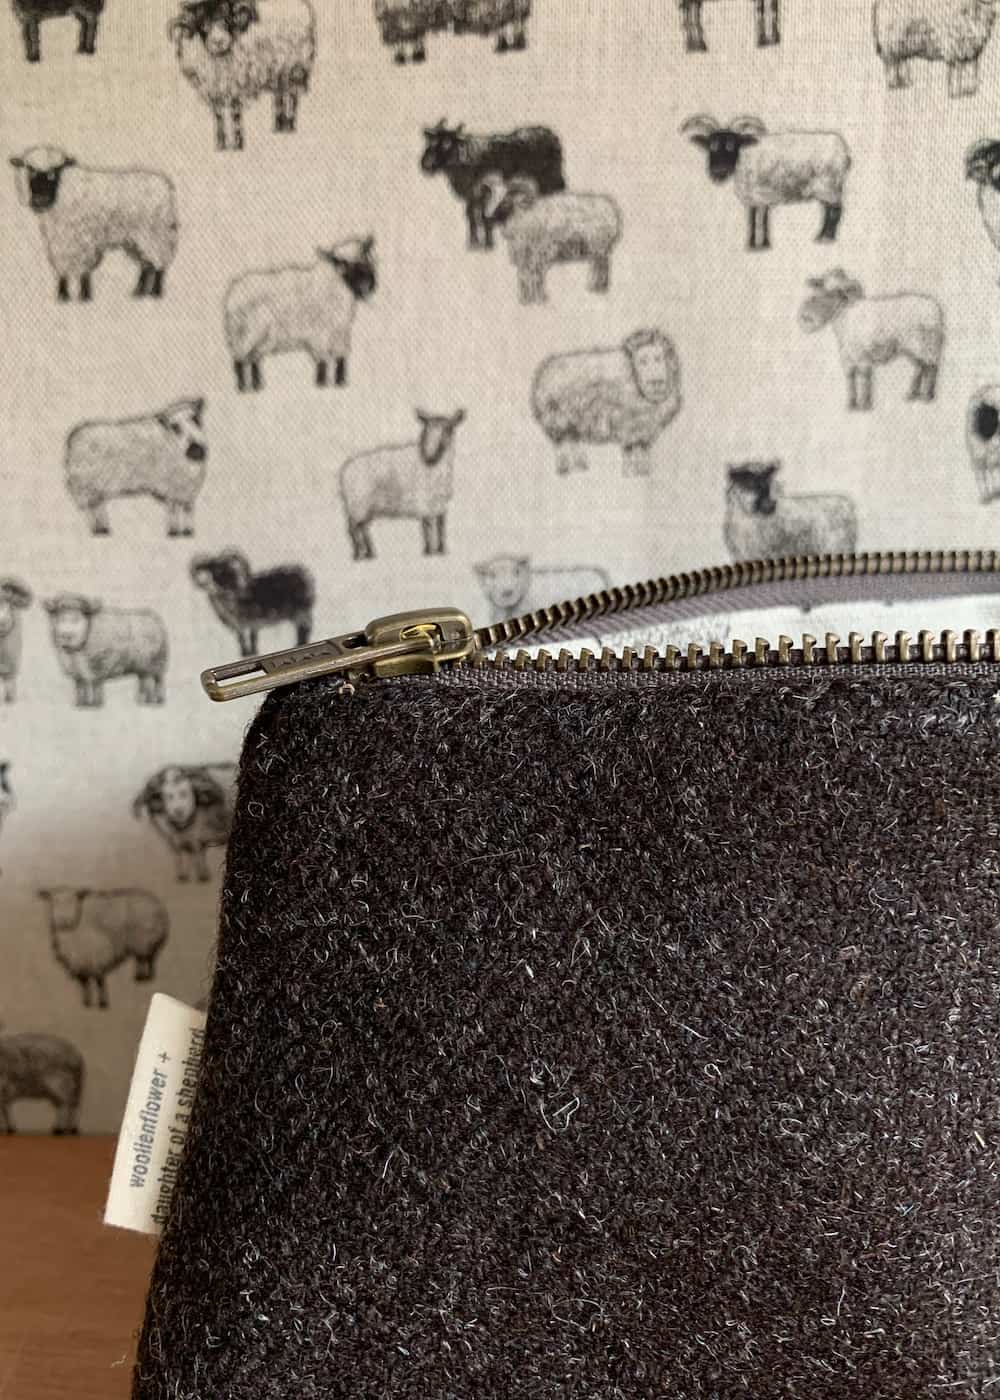 A brown/black tweed pouch in front of fabric with sheep.